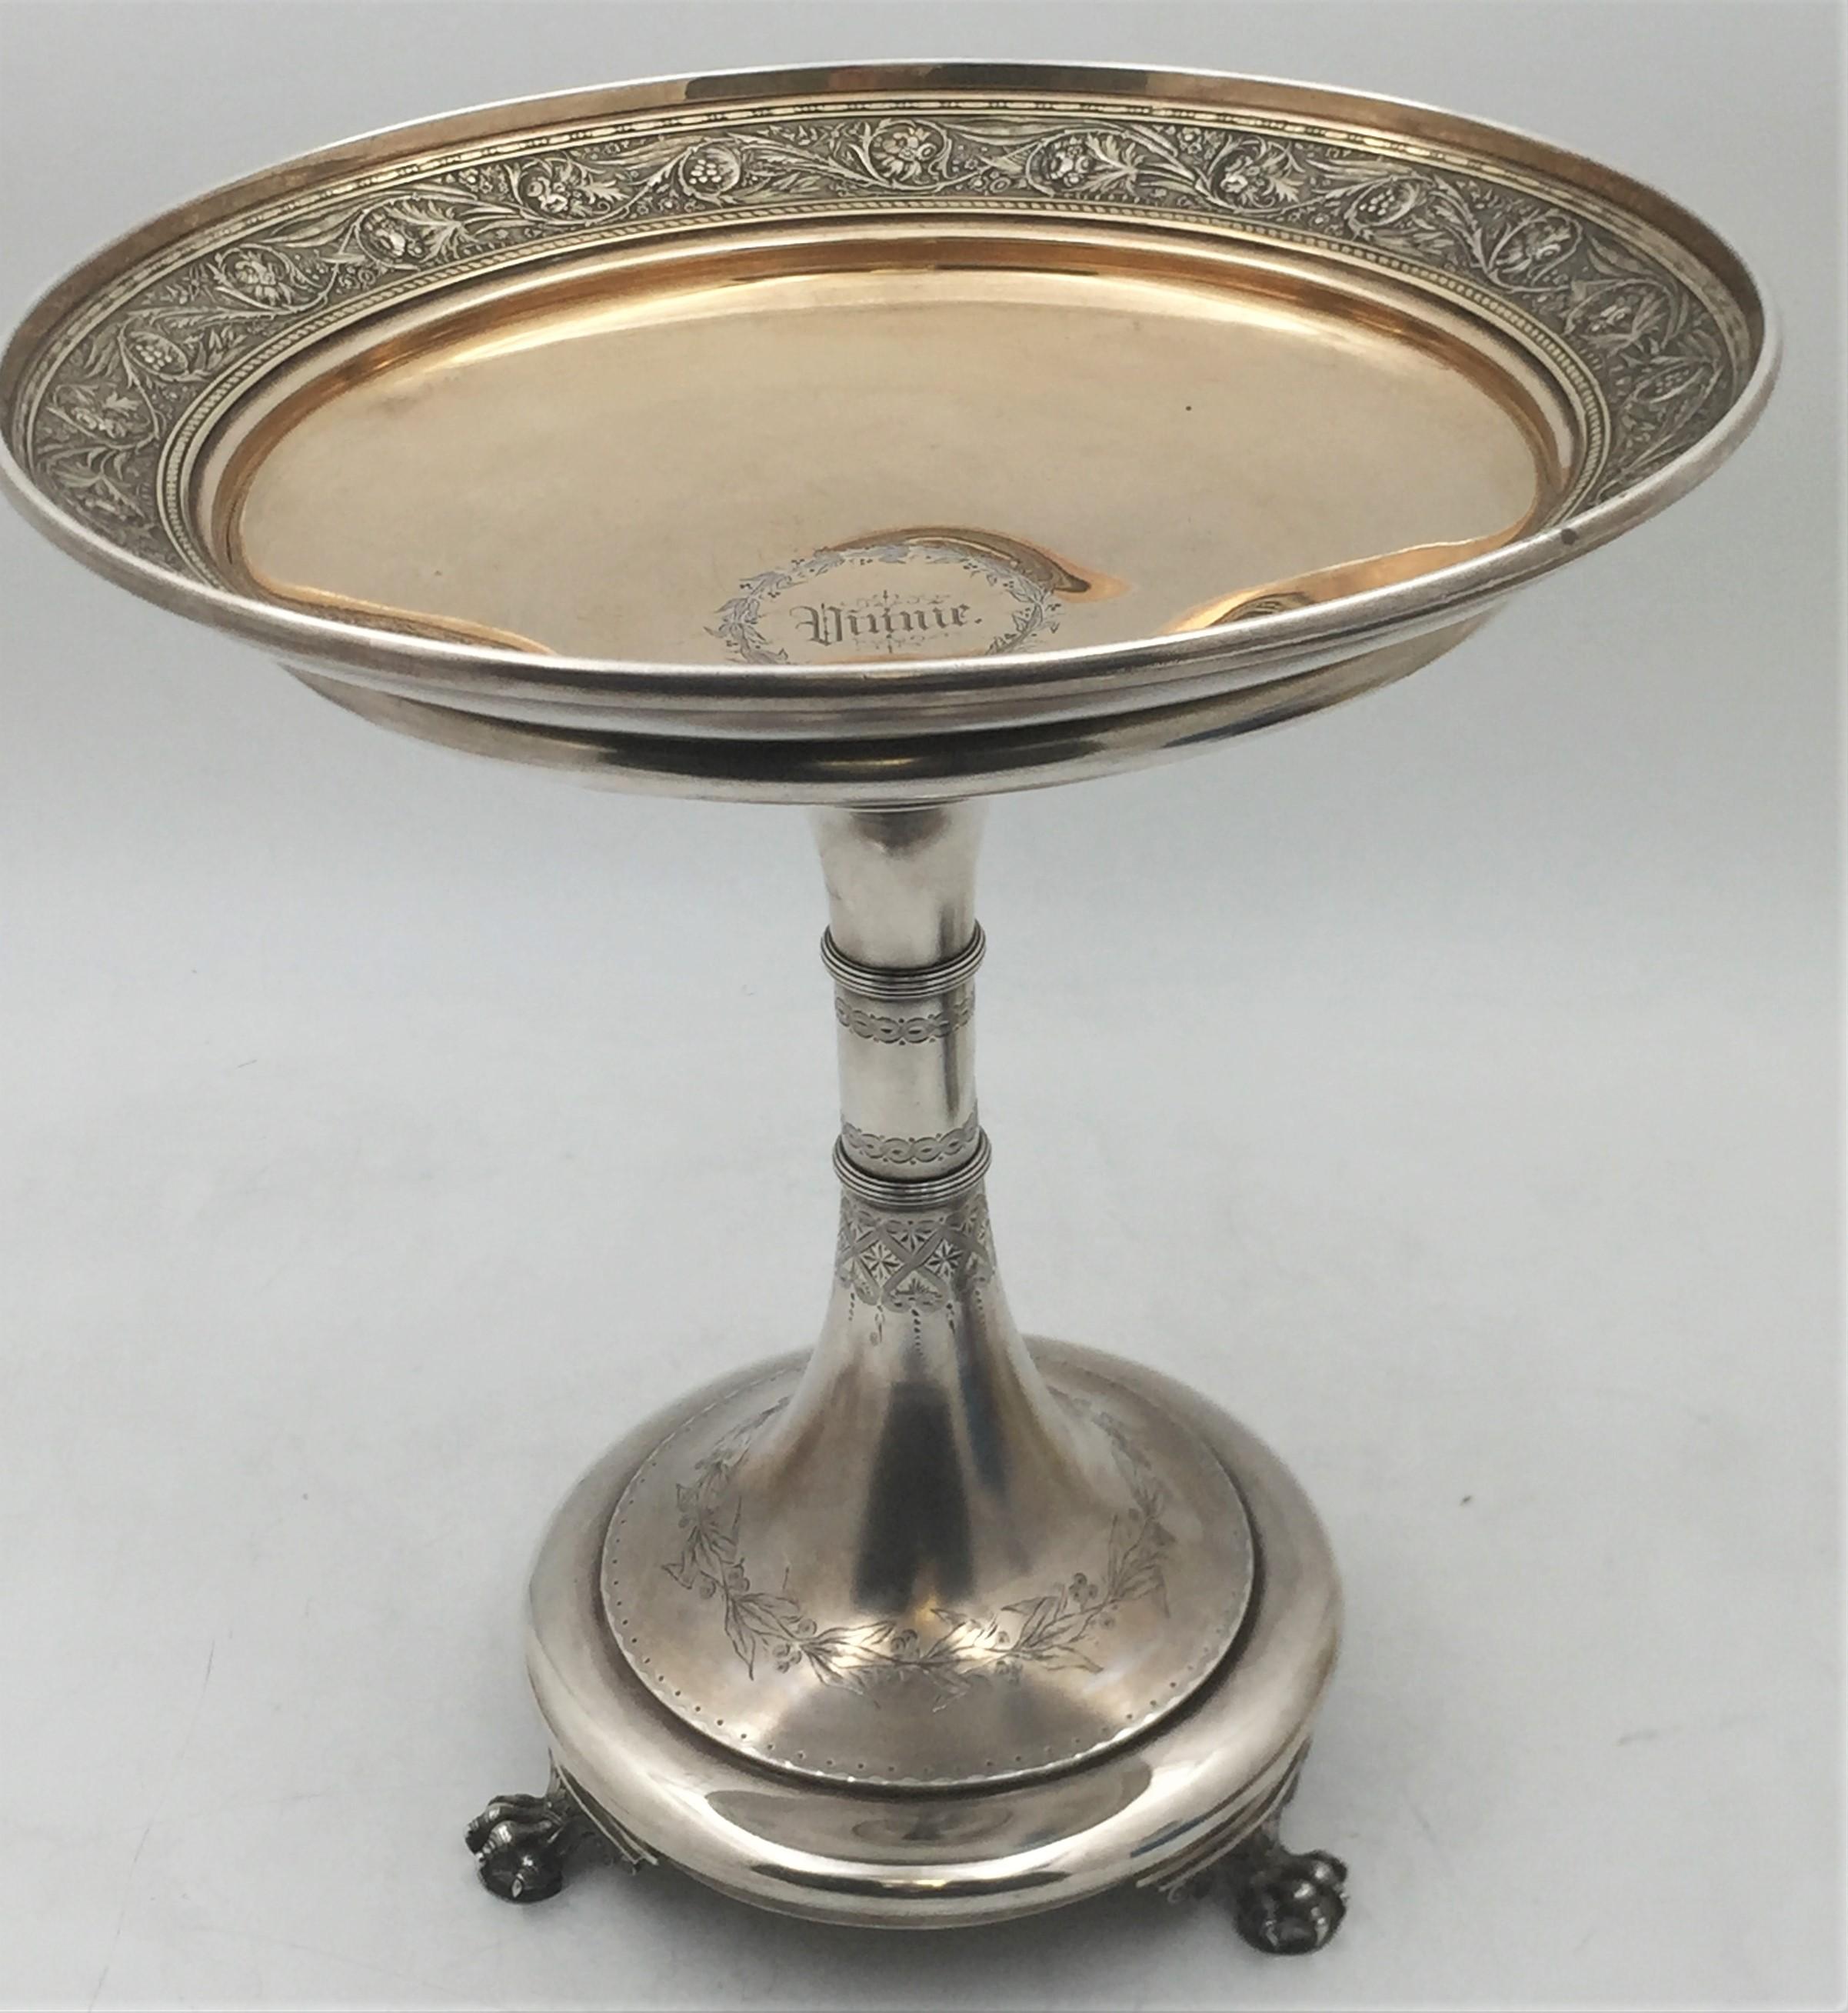 Magnificent Gorham, partially gilt sterling silver centerpiece stand from 1875 resting on 3 highly realistic claws. The stem is delicately engraved with floral and geometric motifs while the top displays exquisite, flowing natural motifs. It